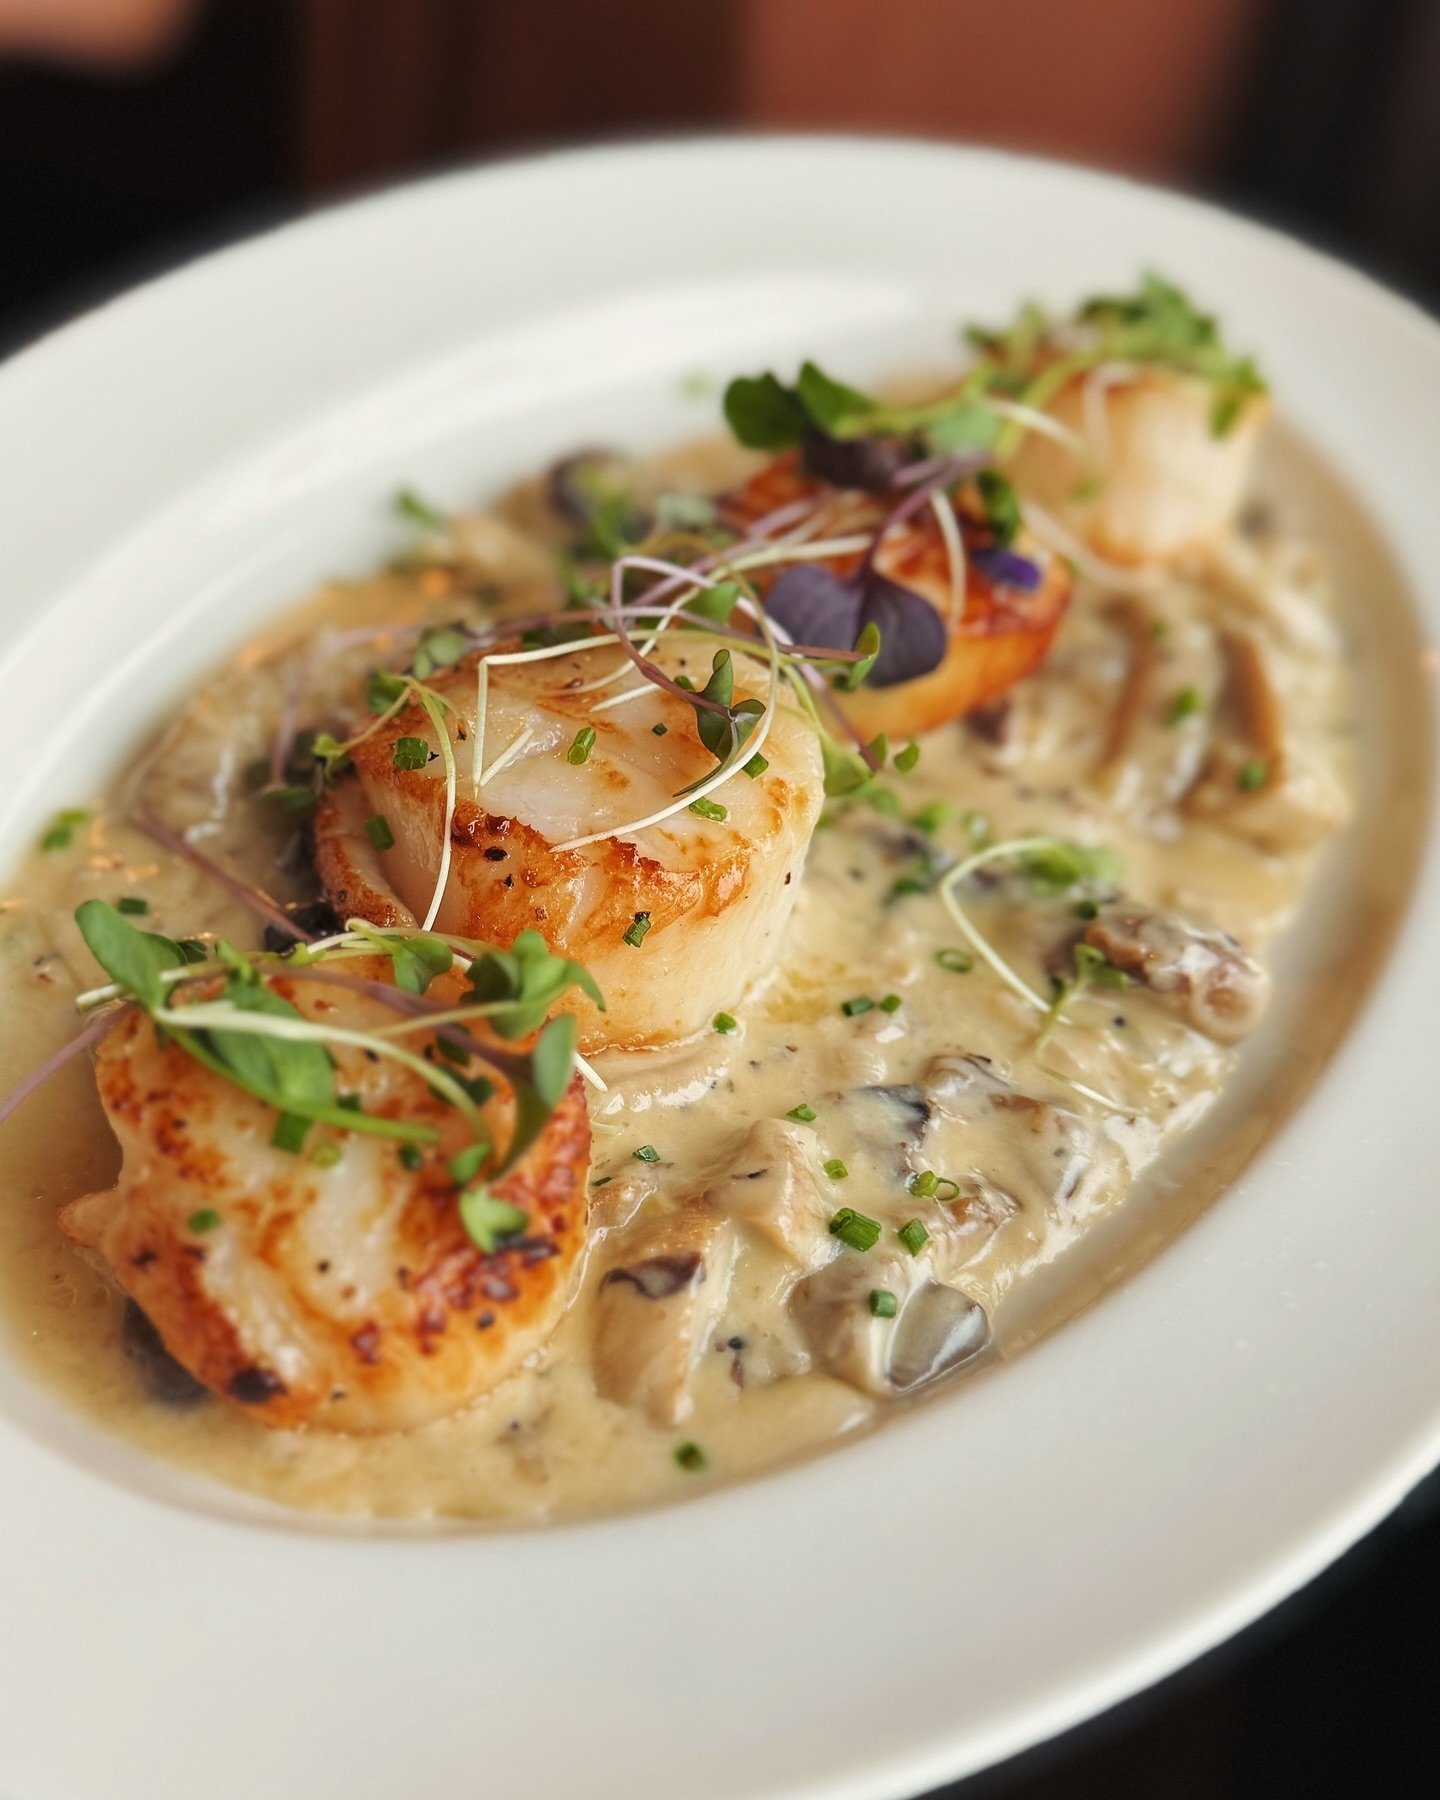 Have you tried our sea scallops with truffle and chanterelle cream sauce? Let us know what you thought!